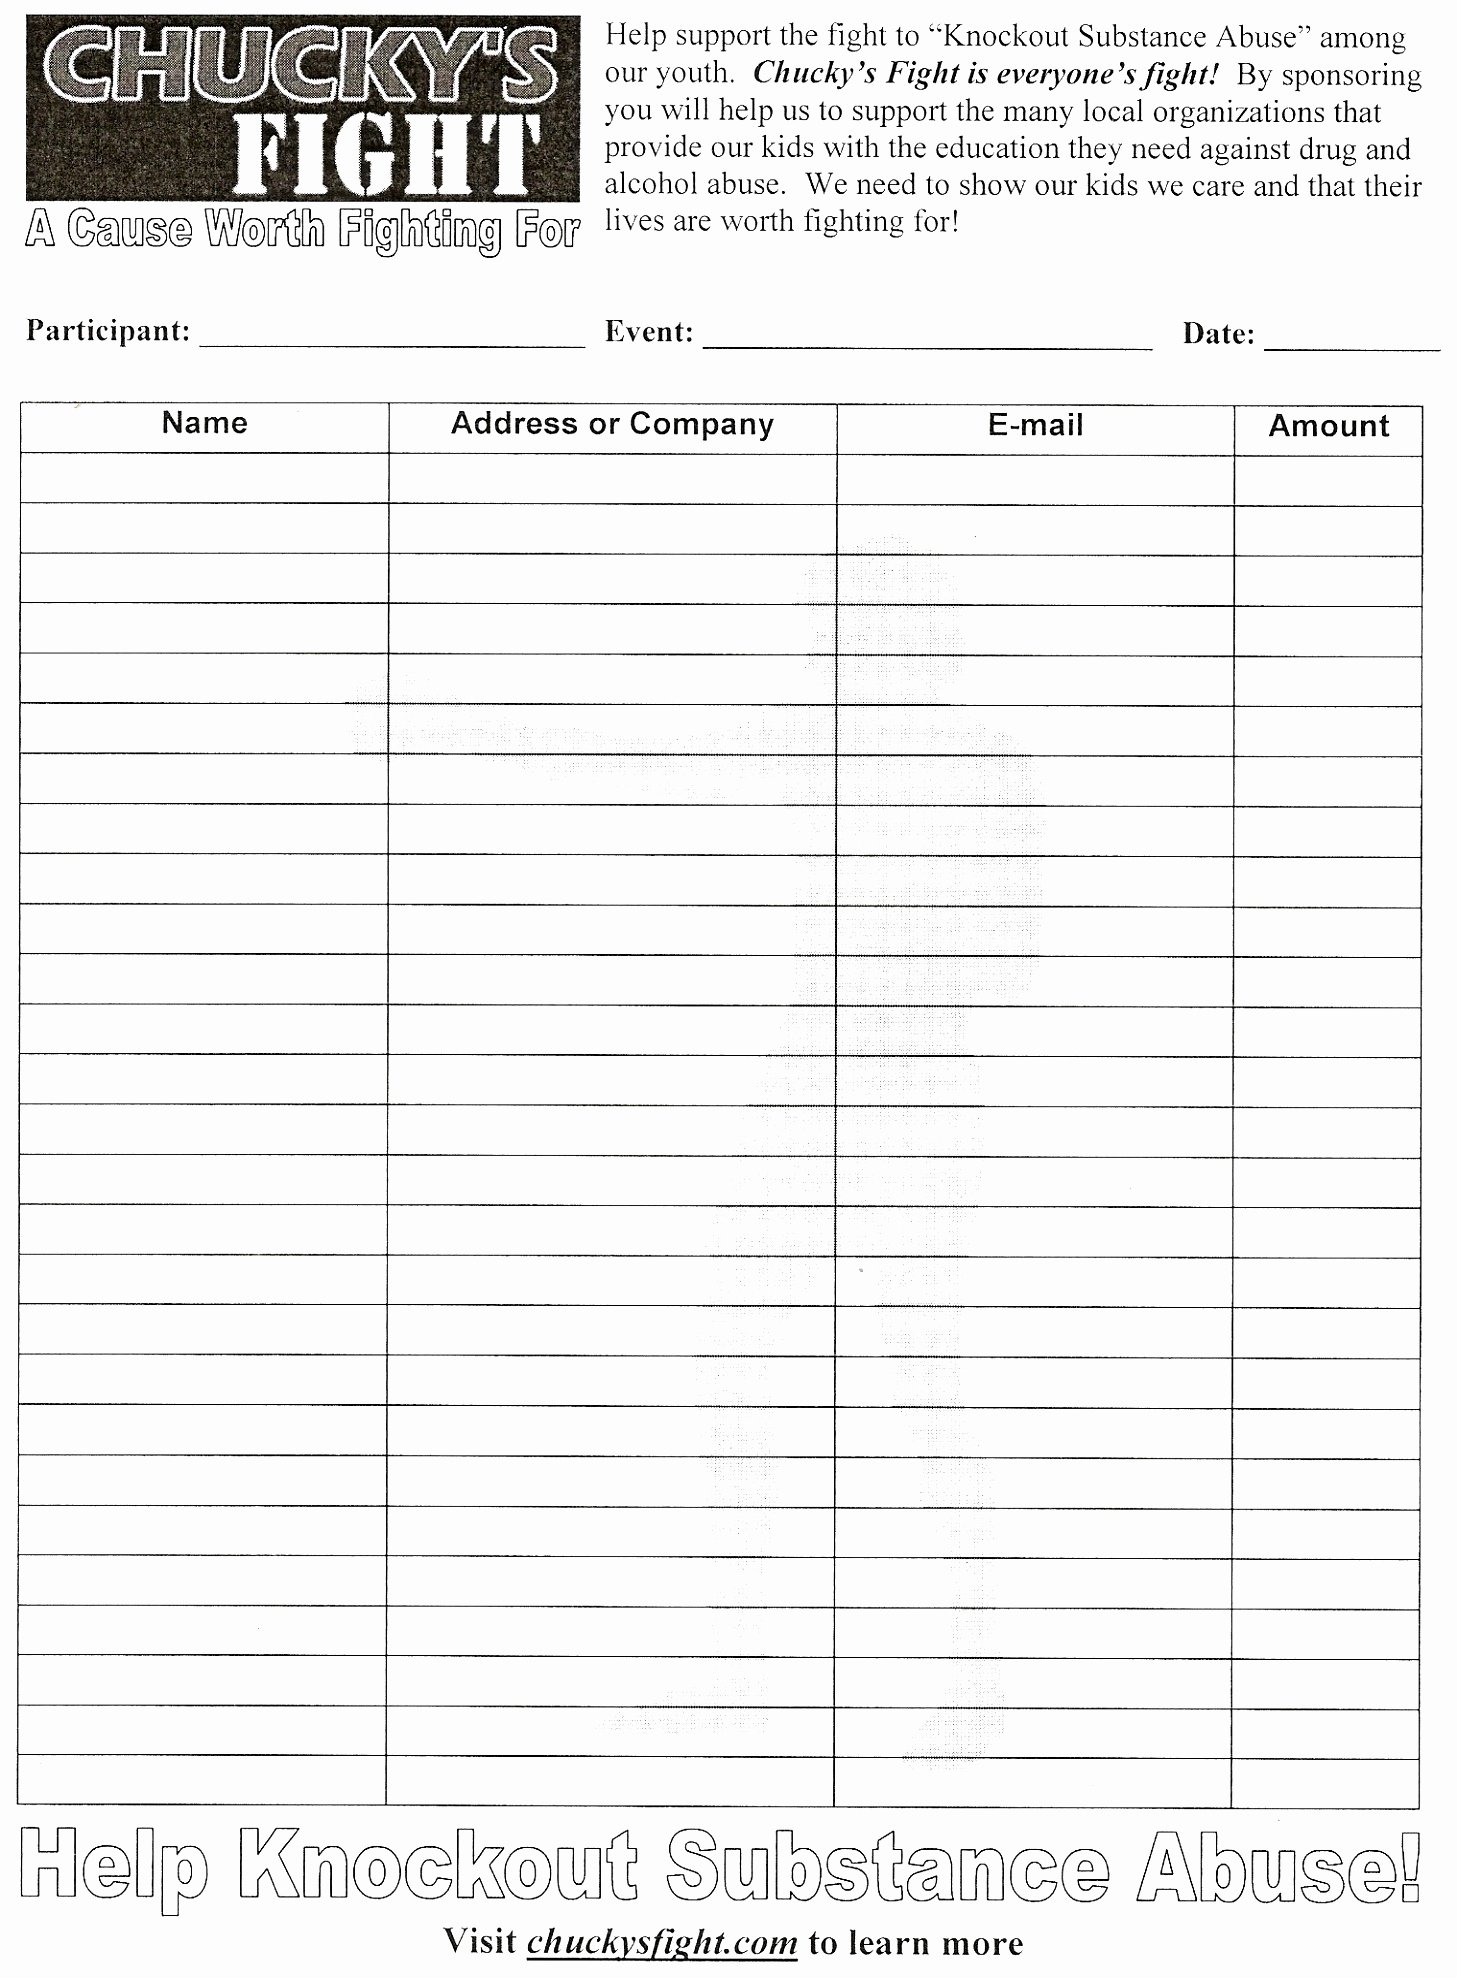 Fundraiser form Template Free Fresh Fundraiser form Template Free – Versatolelive